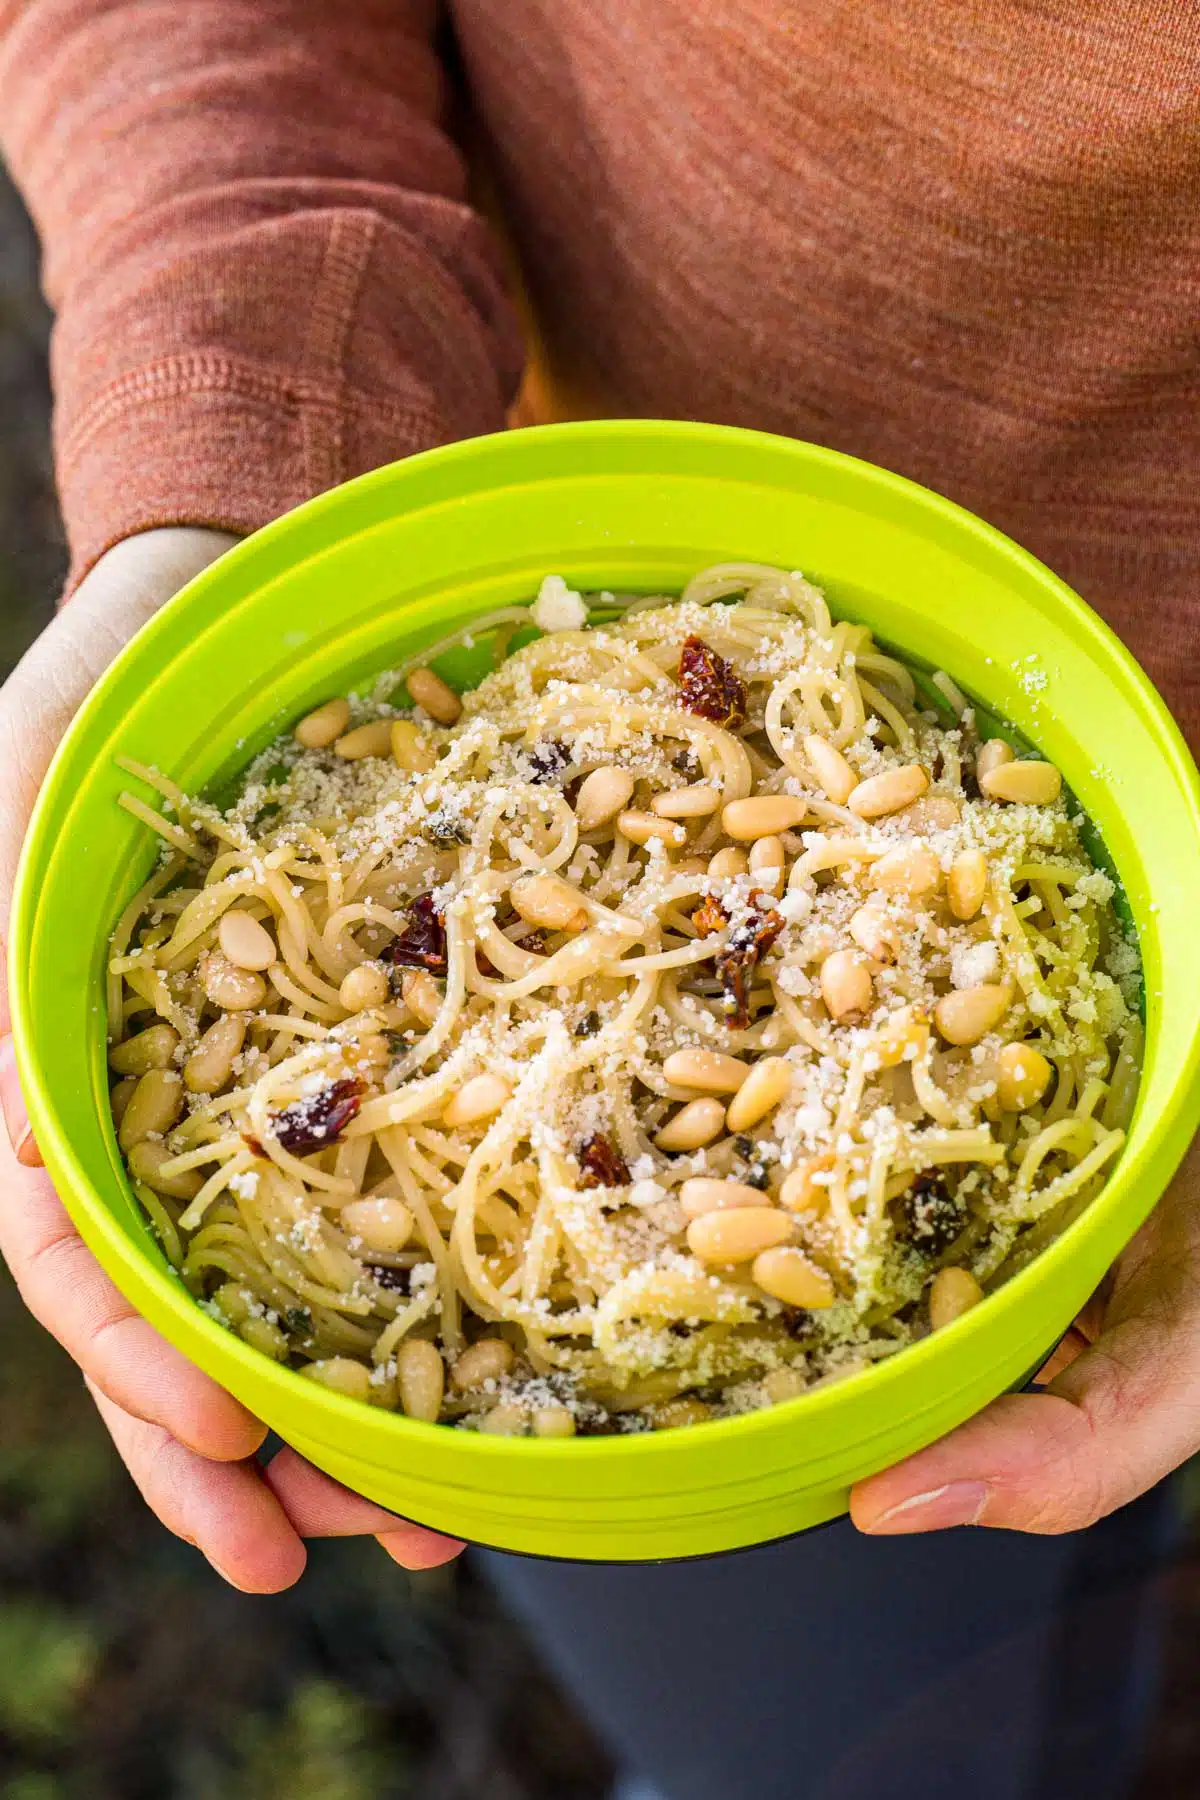 A person holding a bowl filled with pasta, pesto sauce, pine nuts, and sun dried tomatoes.